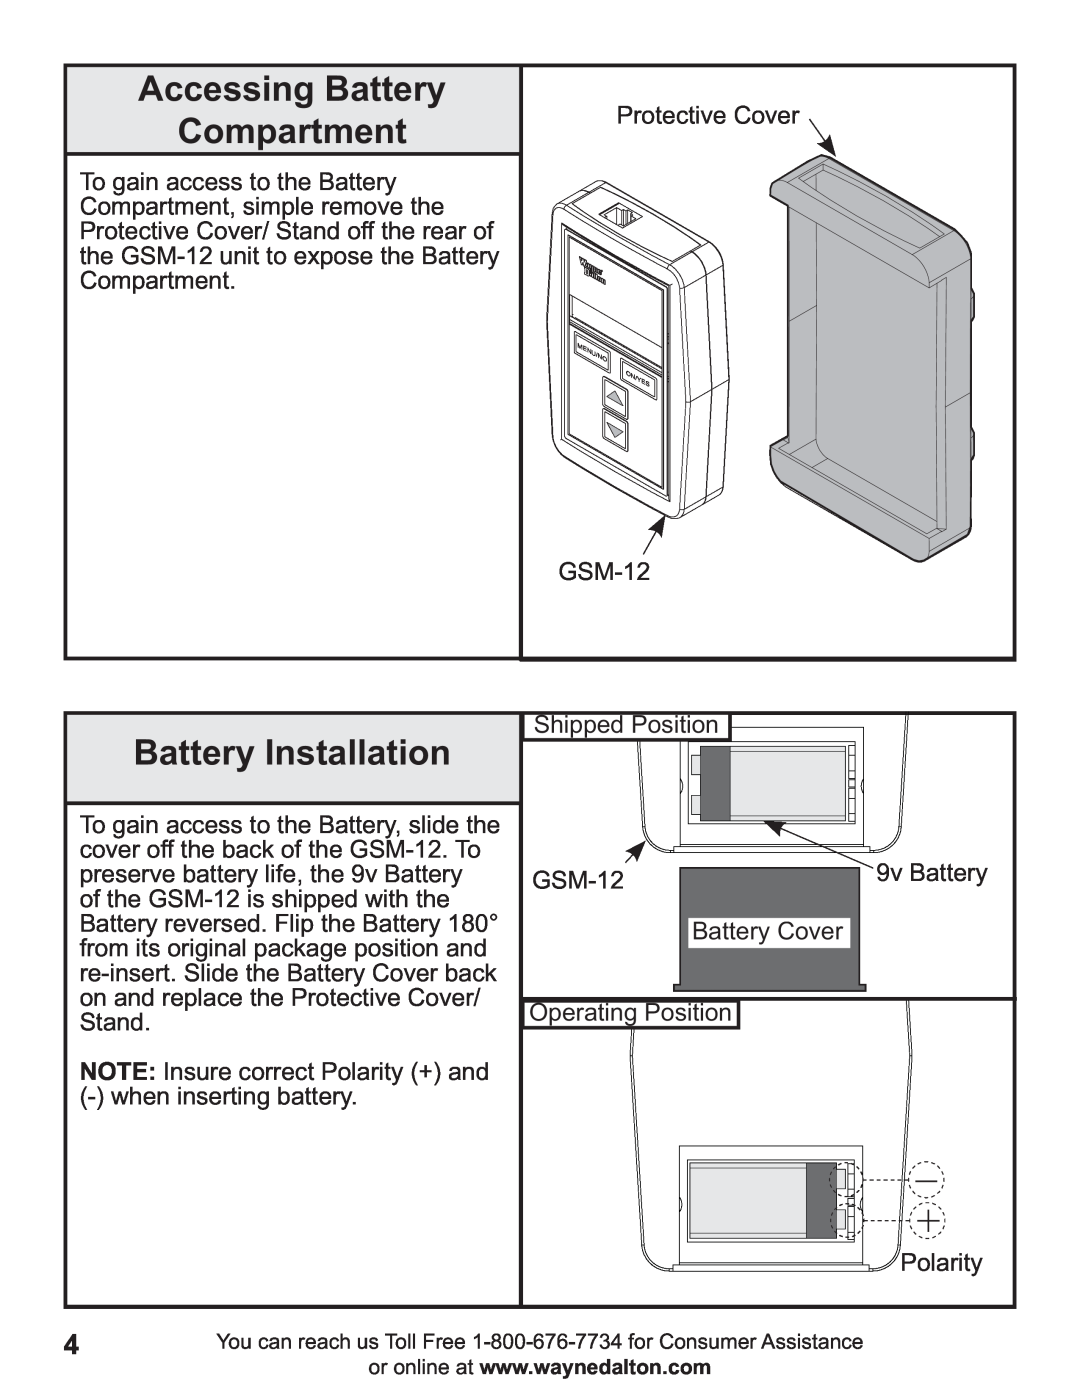 Wayne-Dalton GSM-12 operating instructions Accessing Battery Compartment, Battery Installation 